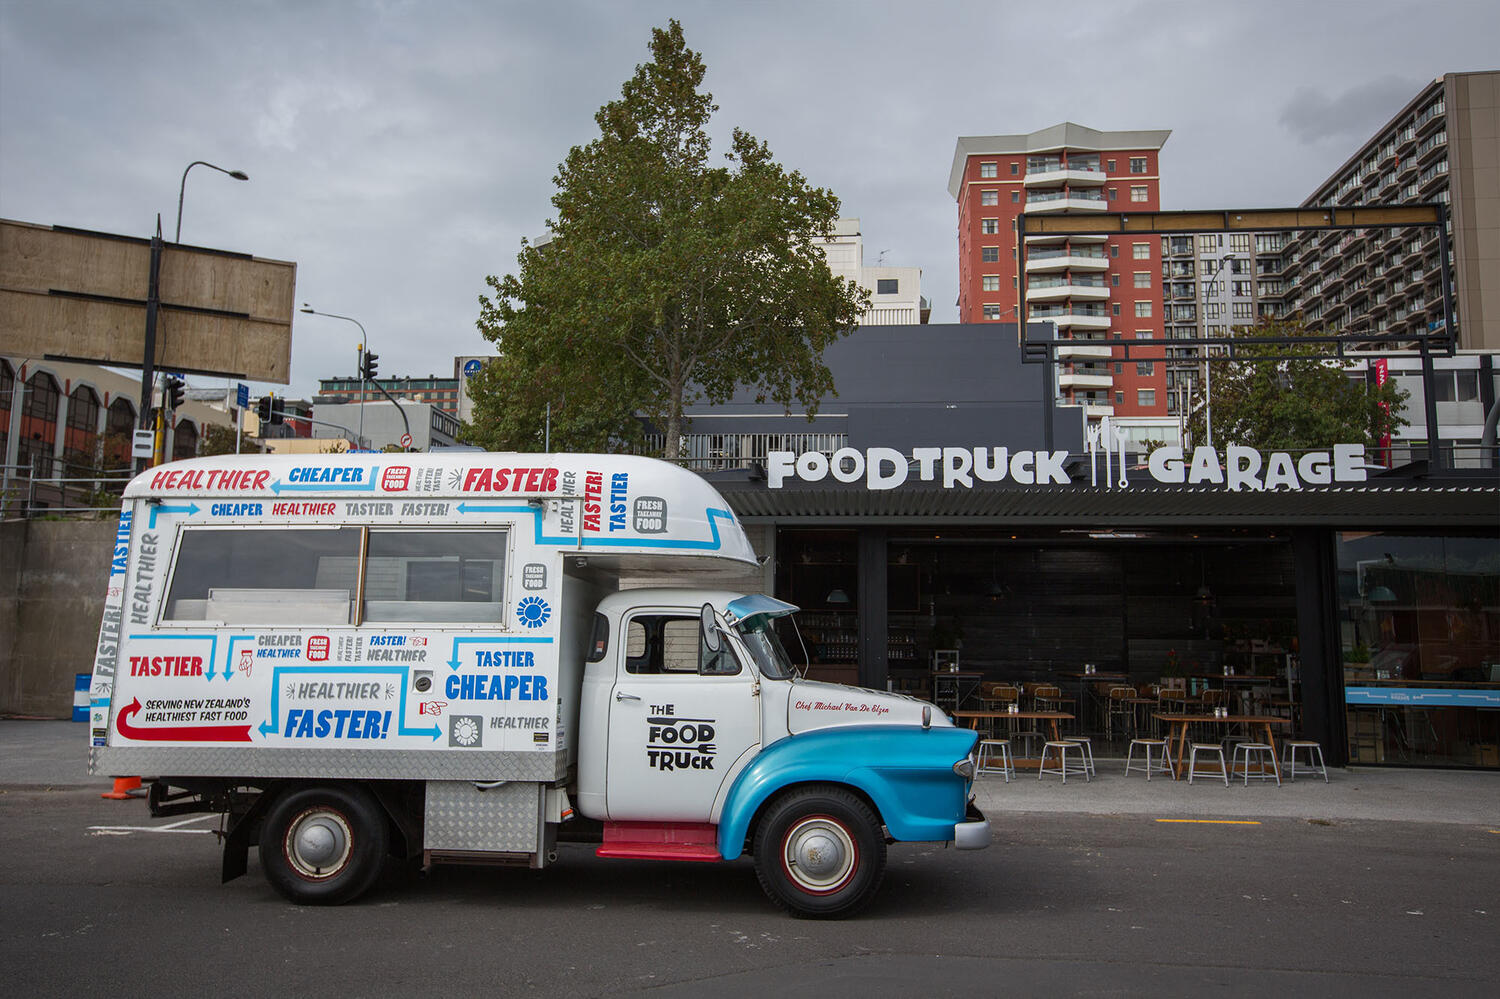 Food Truck Garage Sold by Kakapo Business Sales